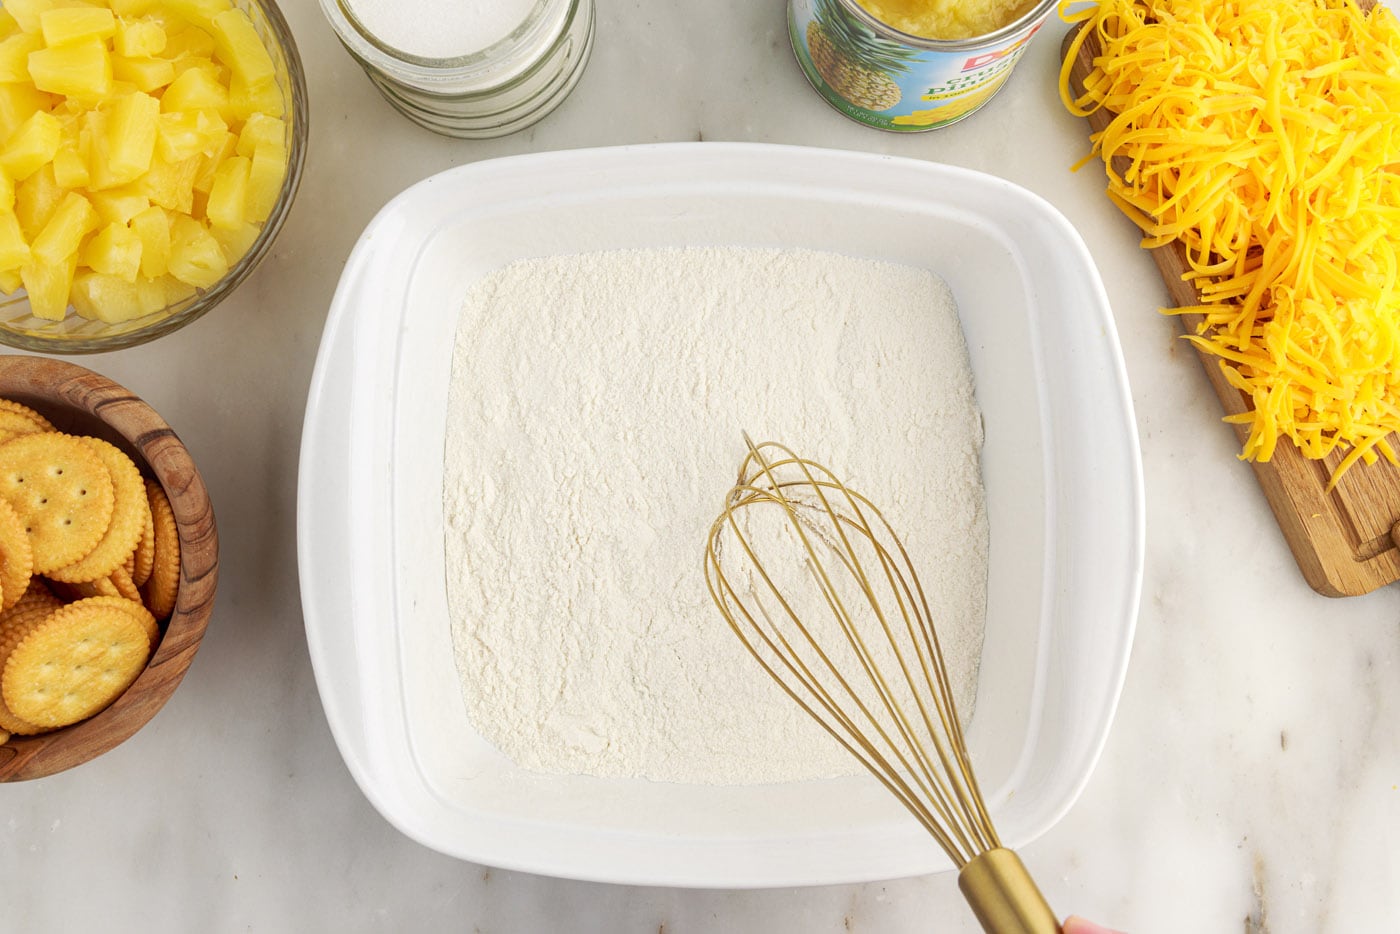 whisking flour and sugar in a baking dish